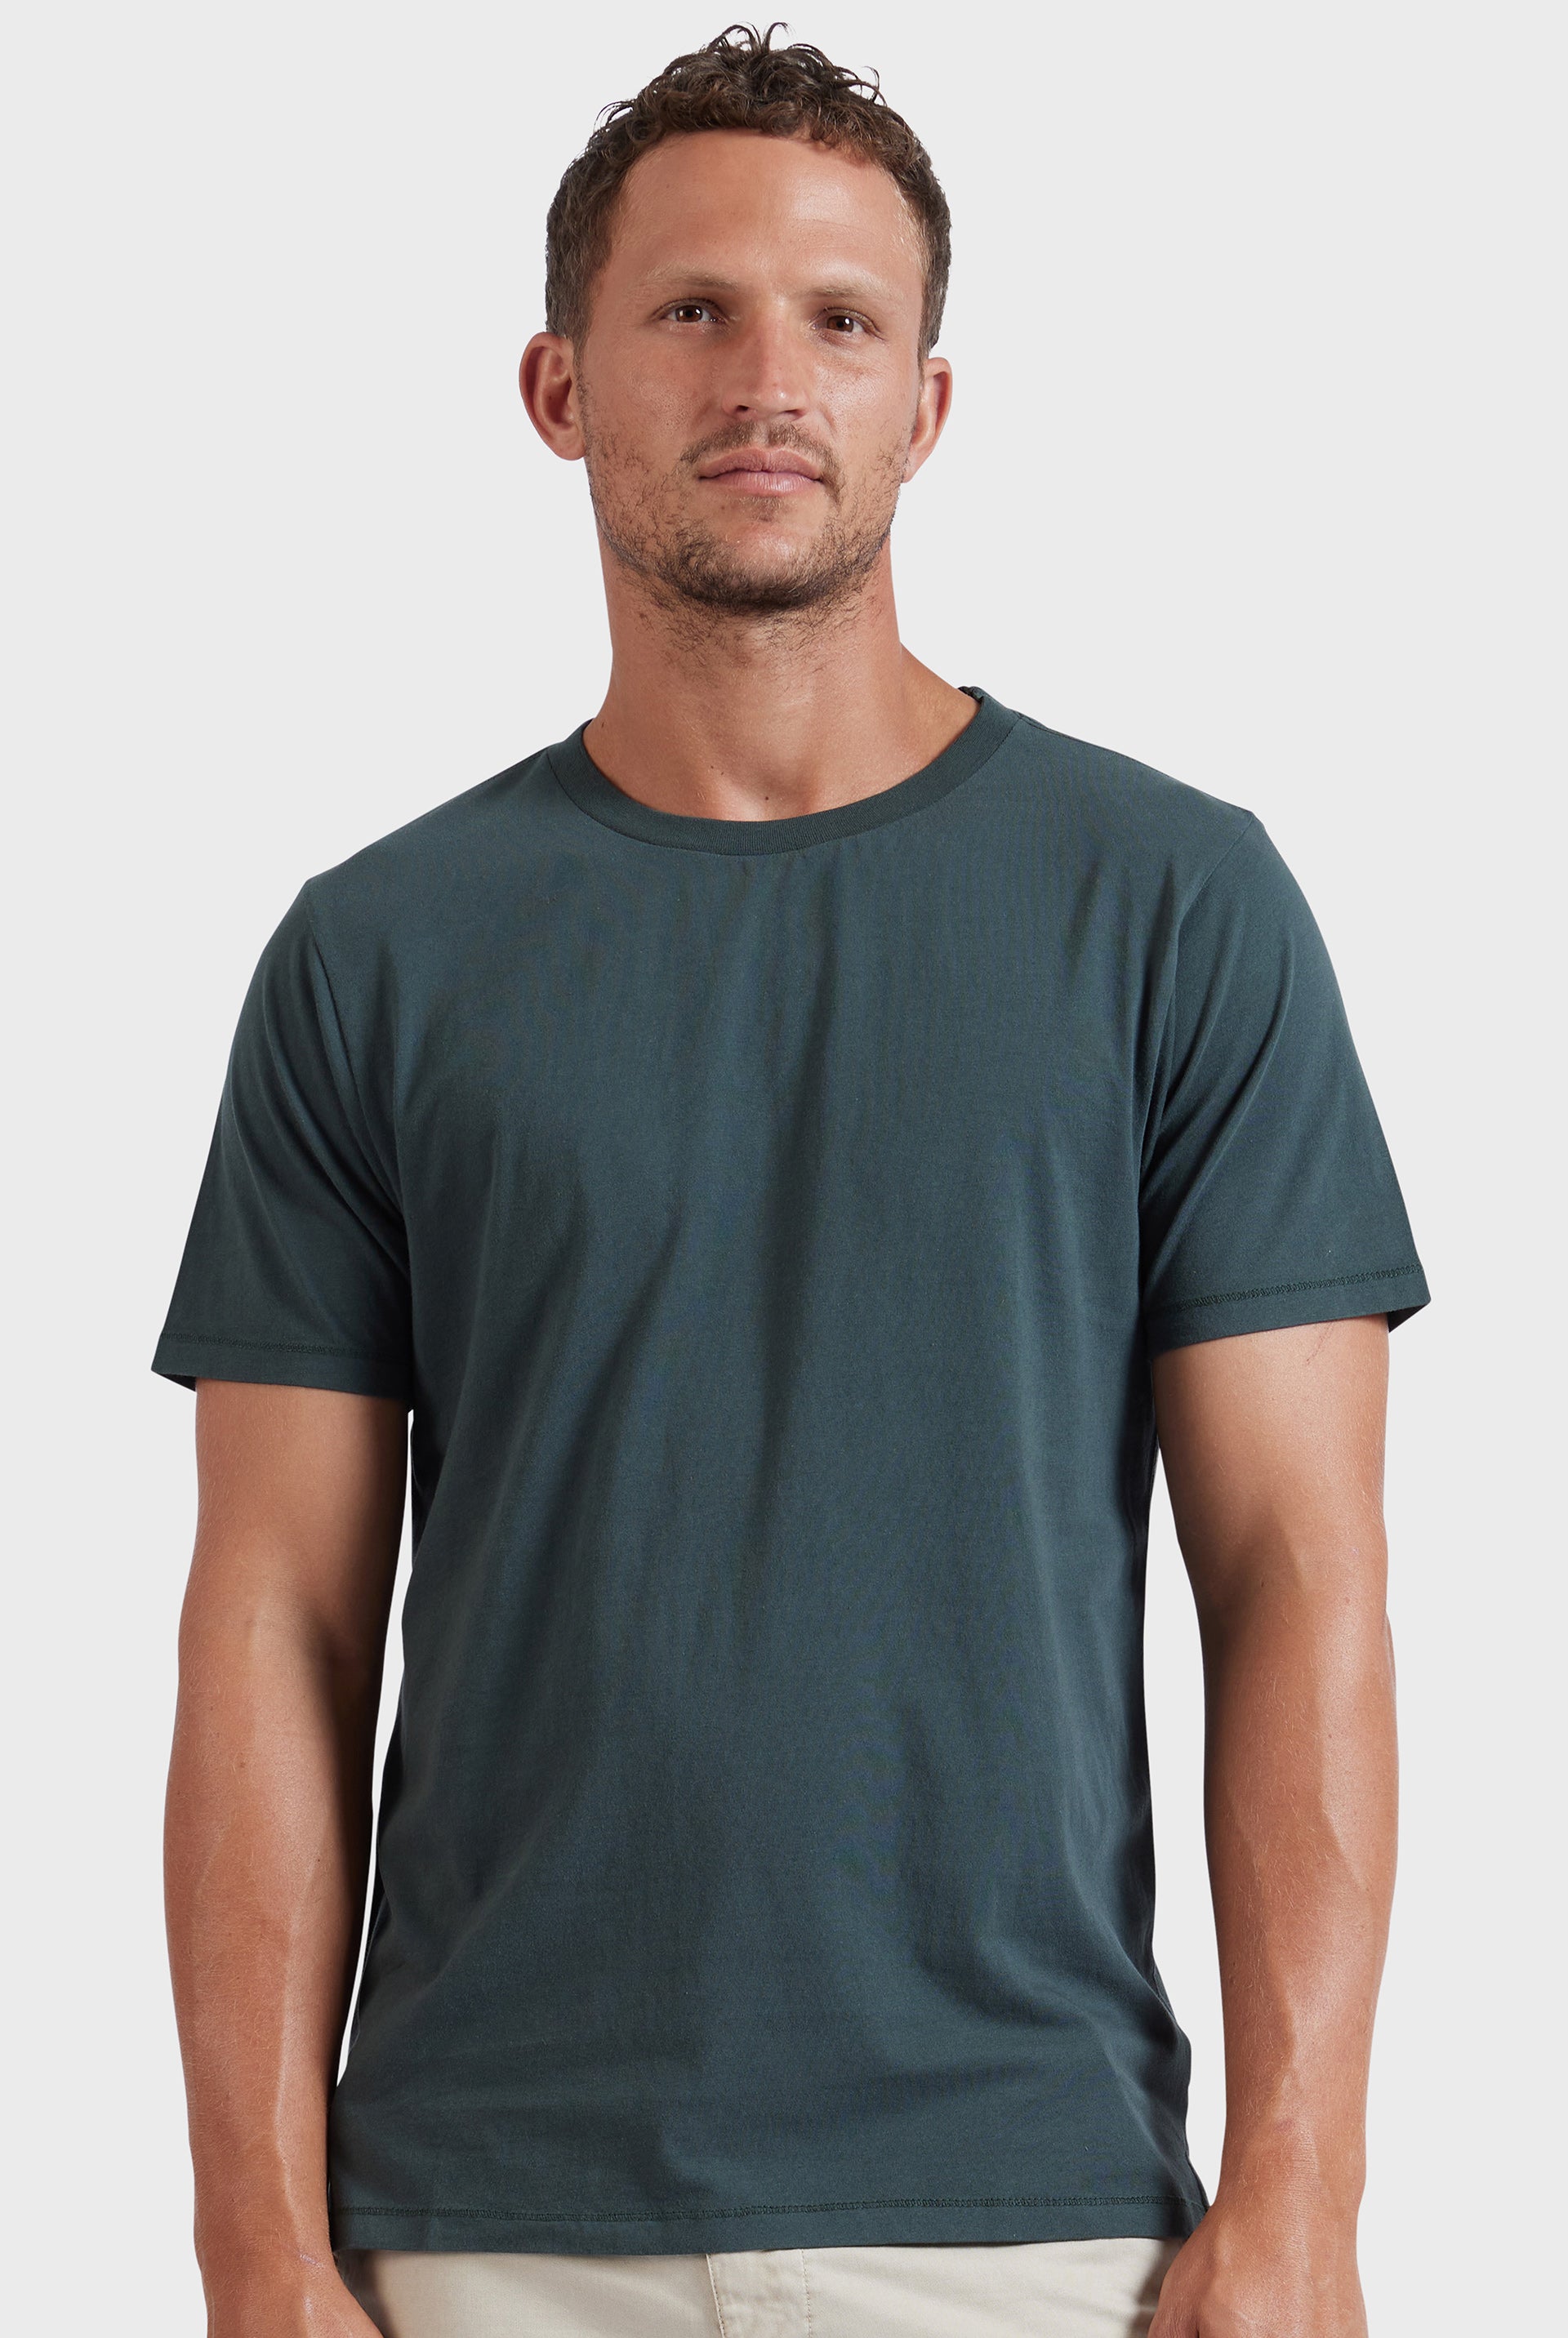 Blizzard Wash Tee in Canteen green | Academy Brand